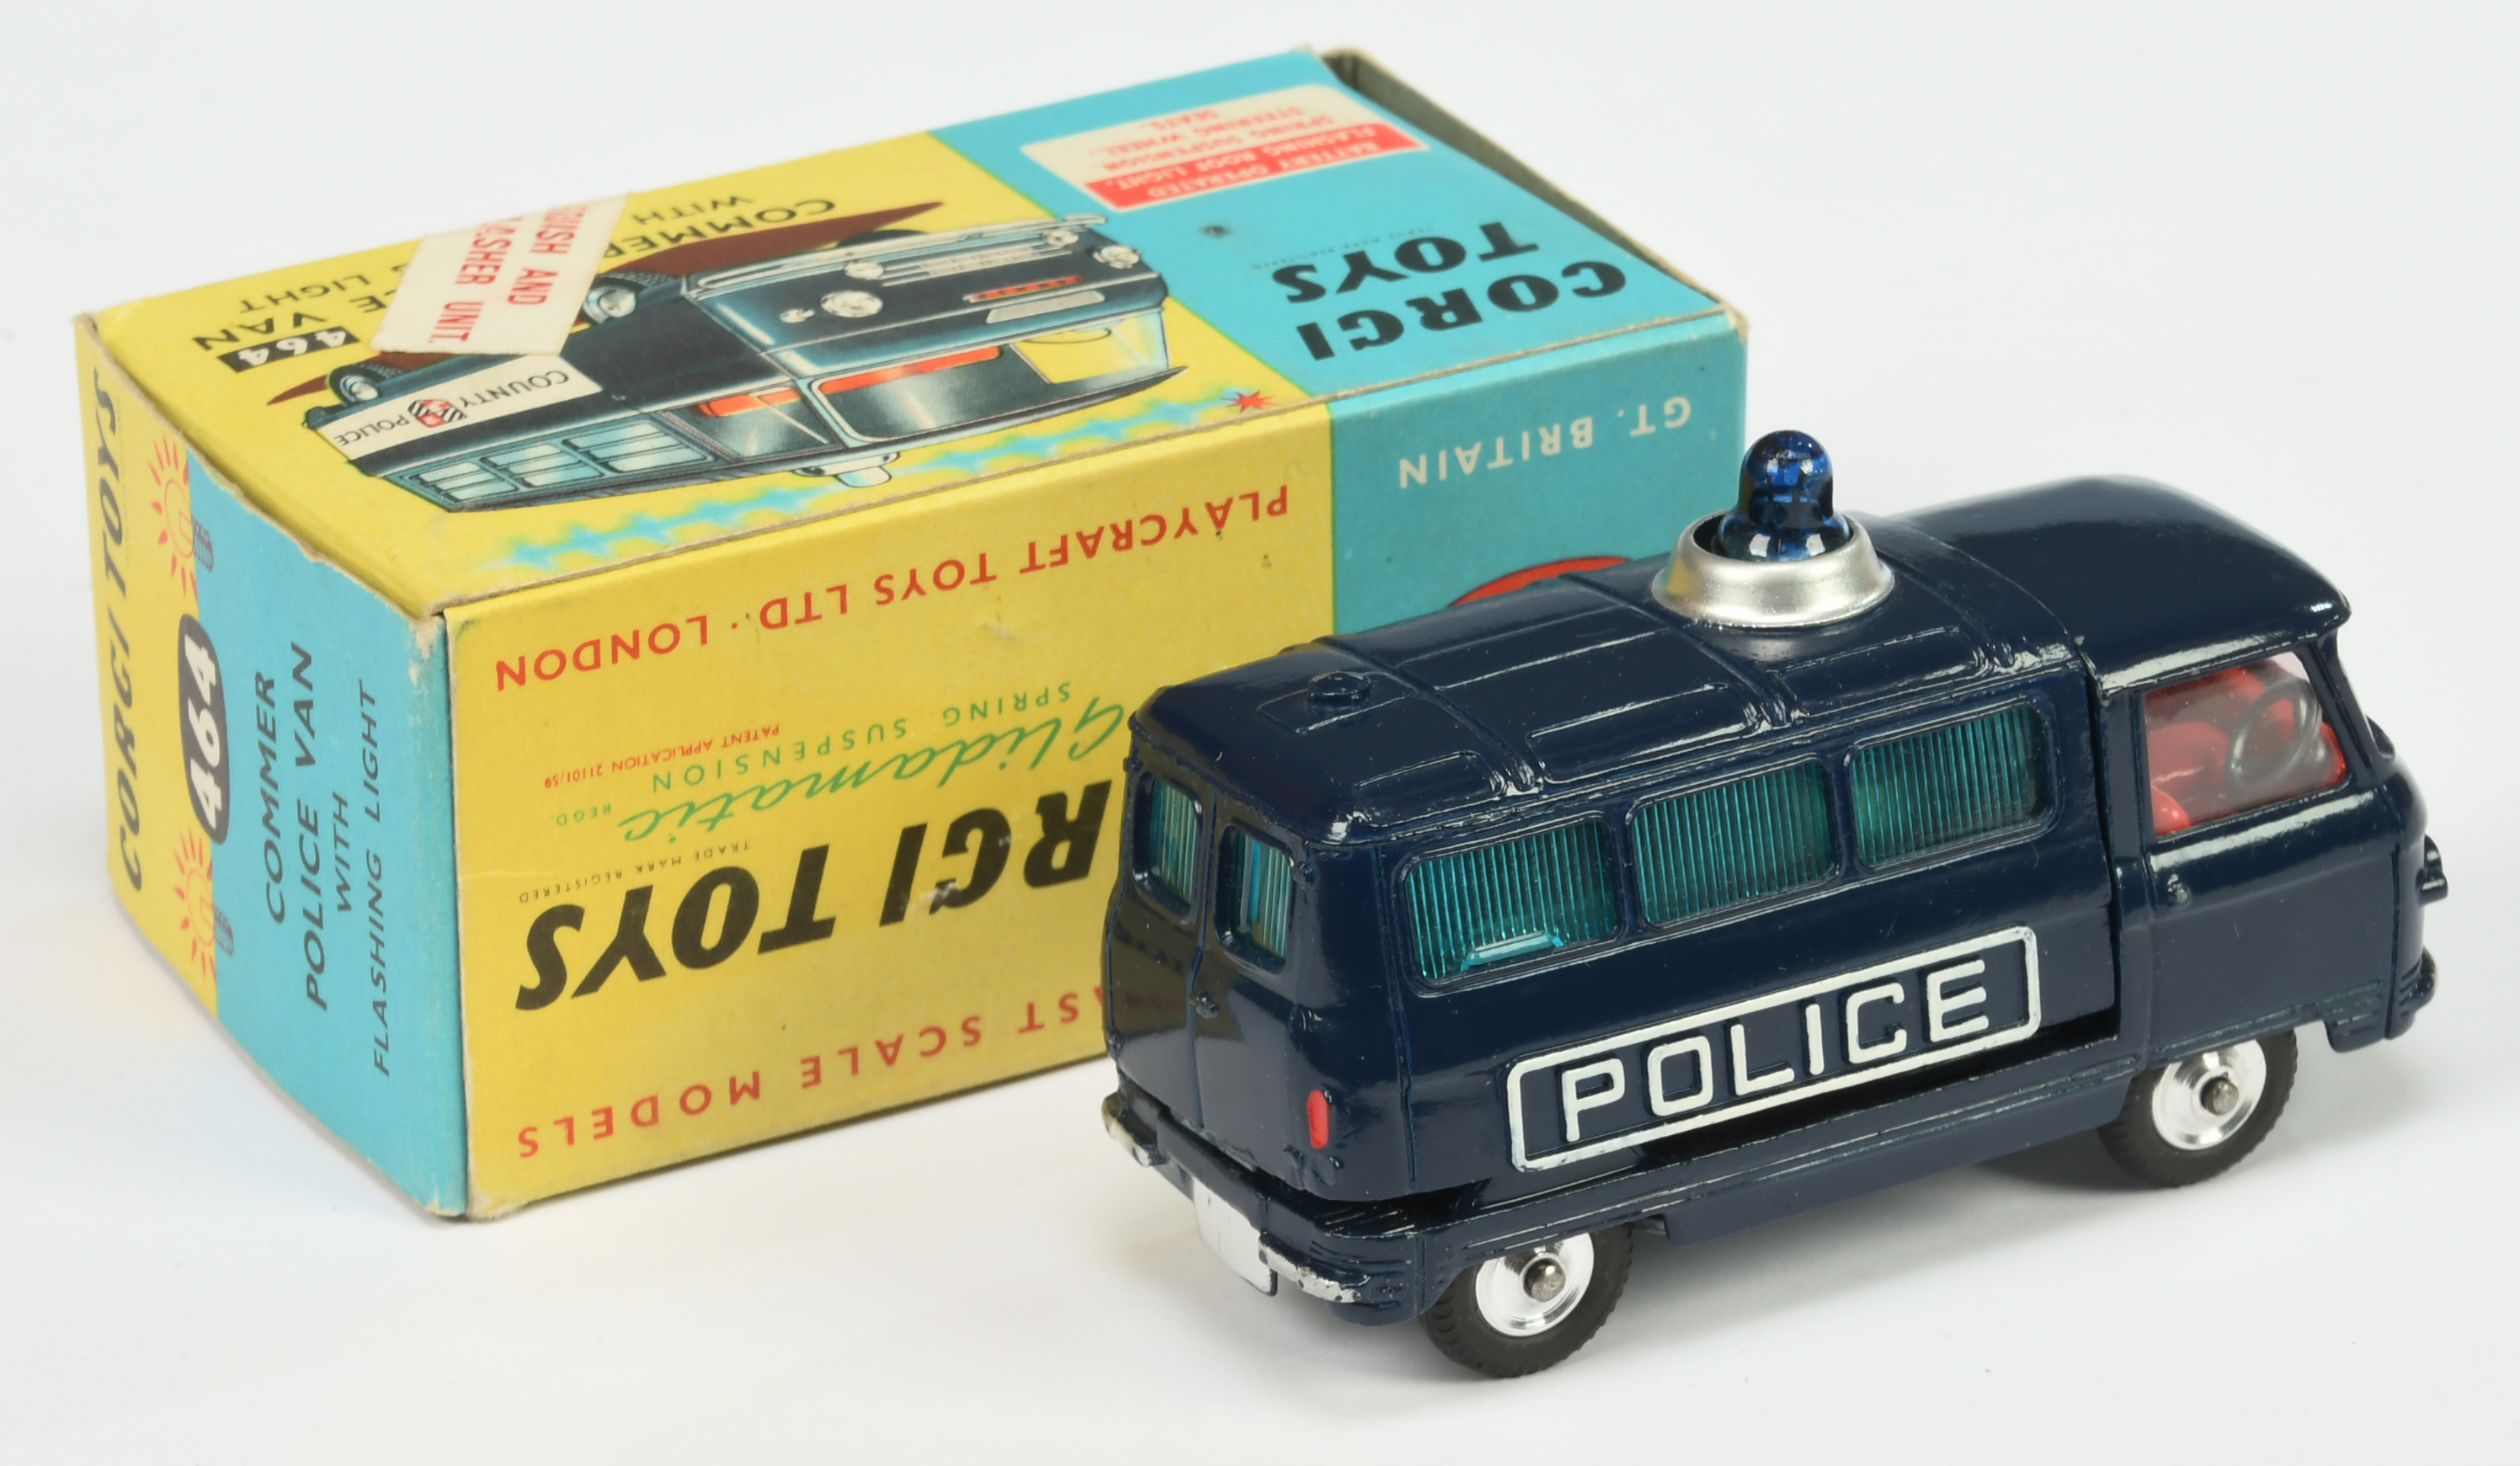 Corgi Toys 464 Commer "Police" Van - Blue body. red interior, battery operated roof light, silver... - Image 2 of 2